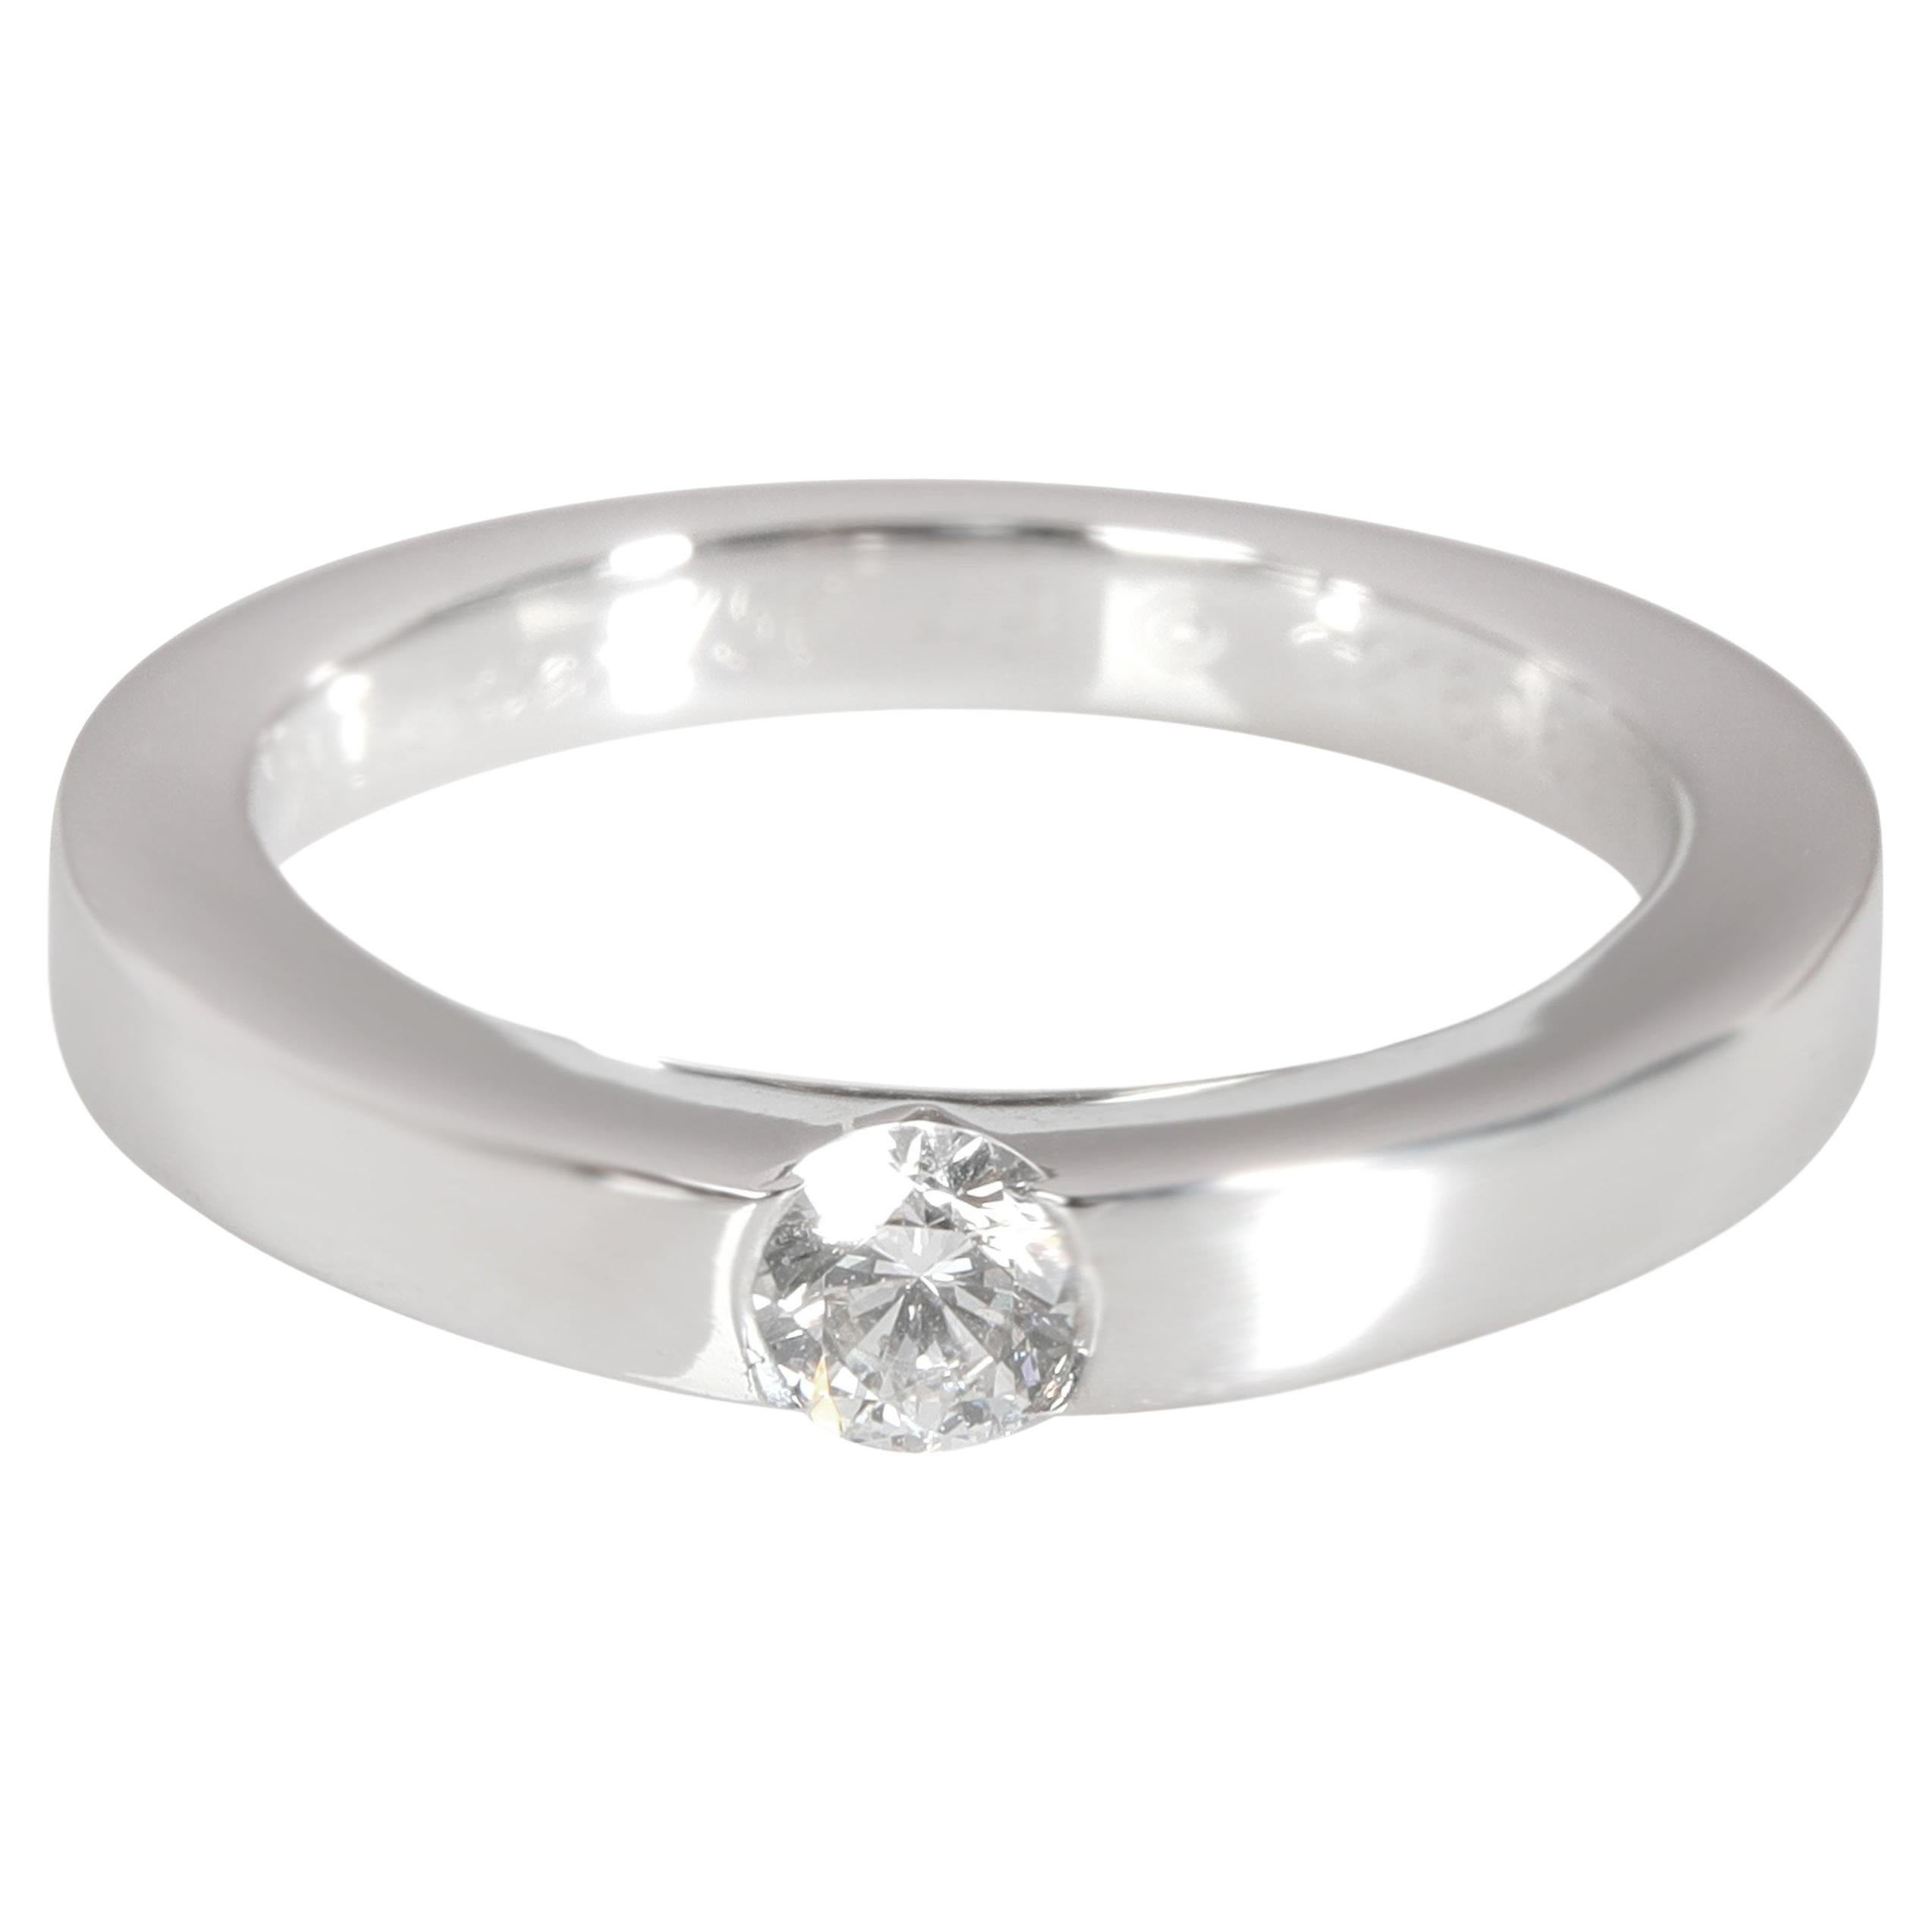 Cartier Diamond Solitaire Ring in Platinum GIA Certified G VVS1 0.21 CT